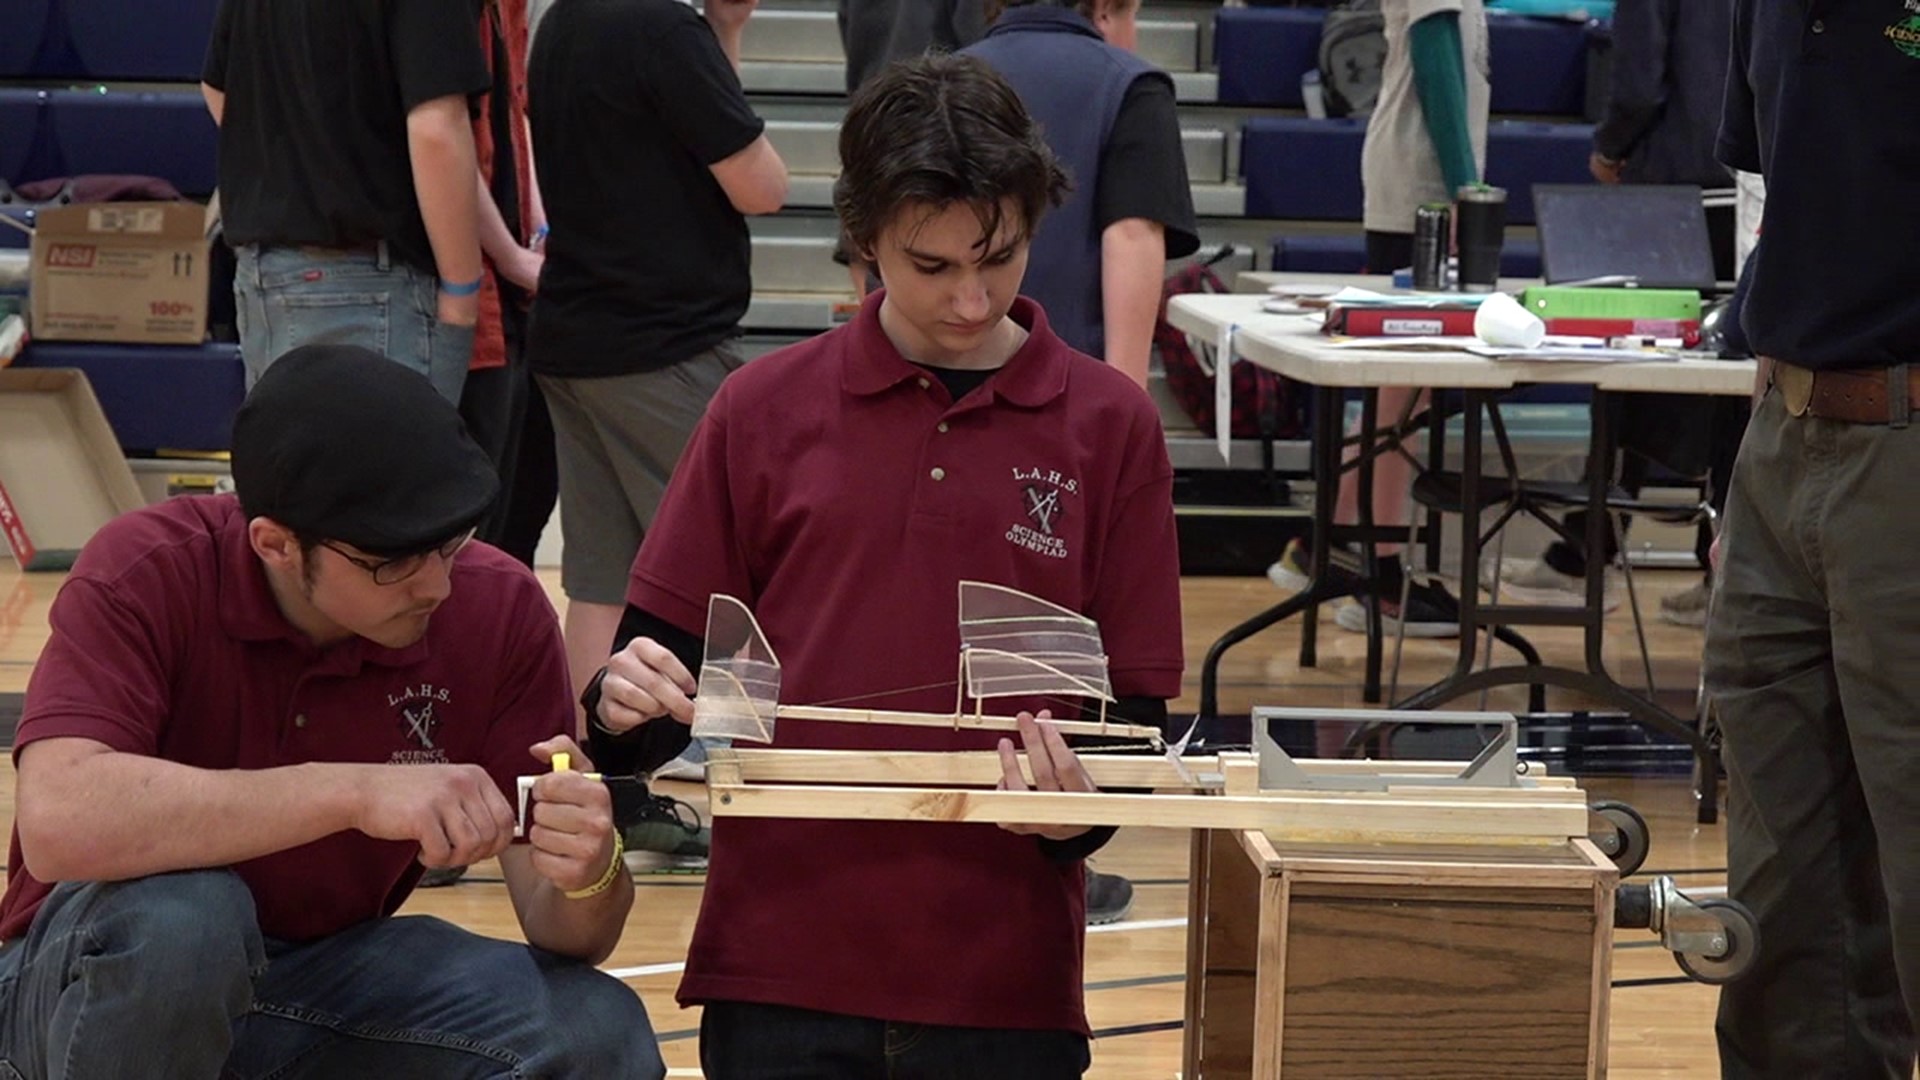 Students around the region have been working on their stem skills for the past few months to show them off at the Science Olympiad Tournament in Luzerne County.